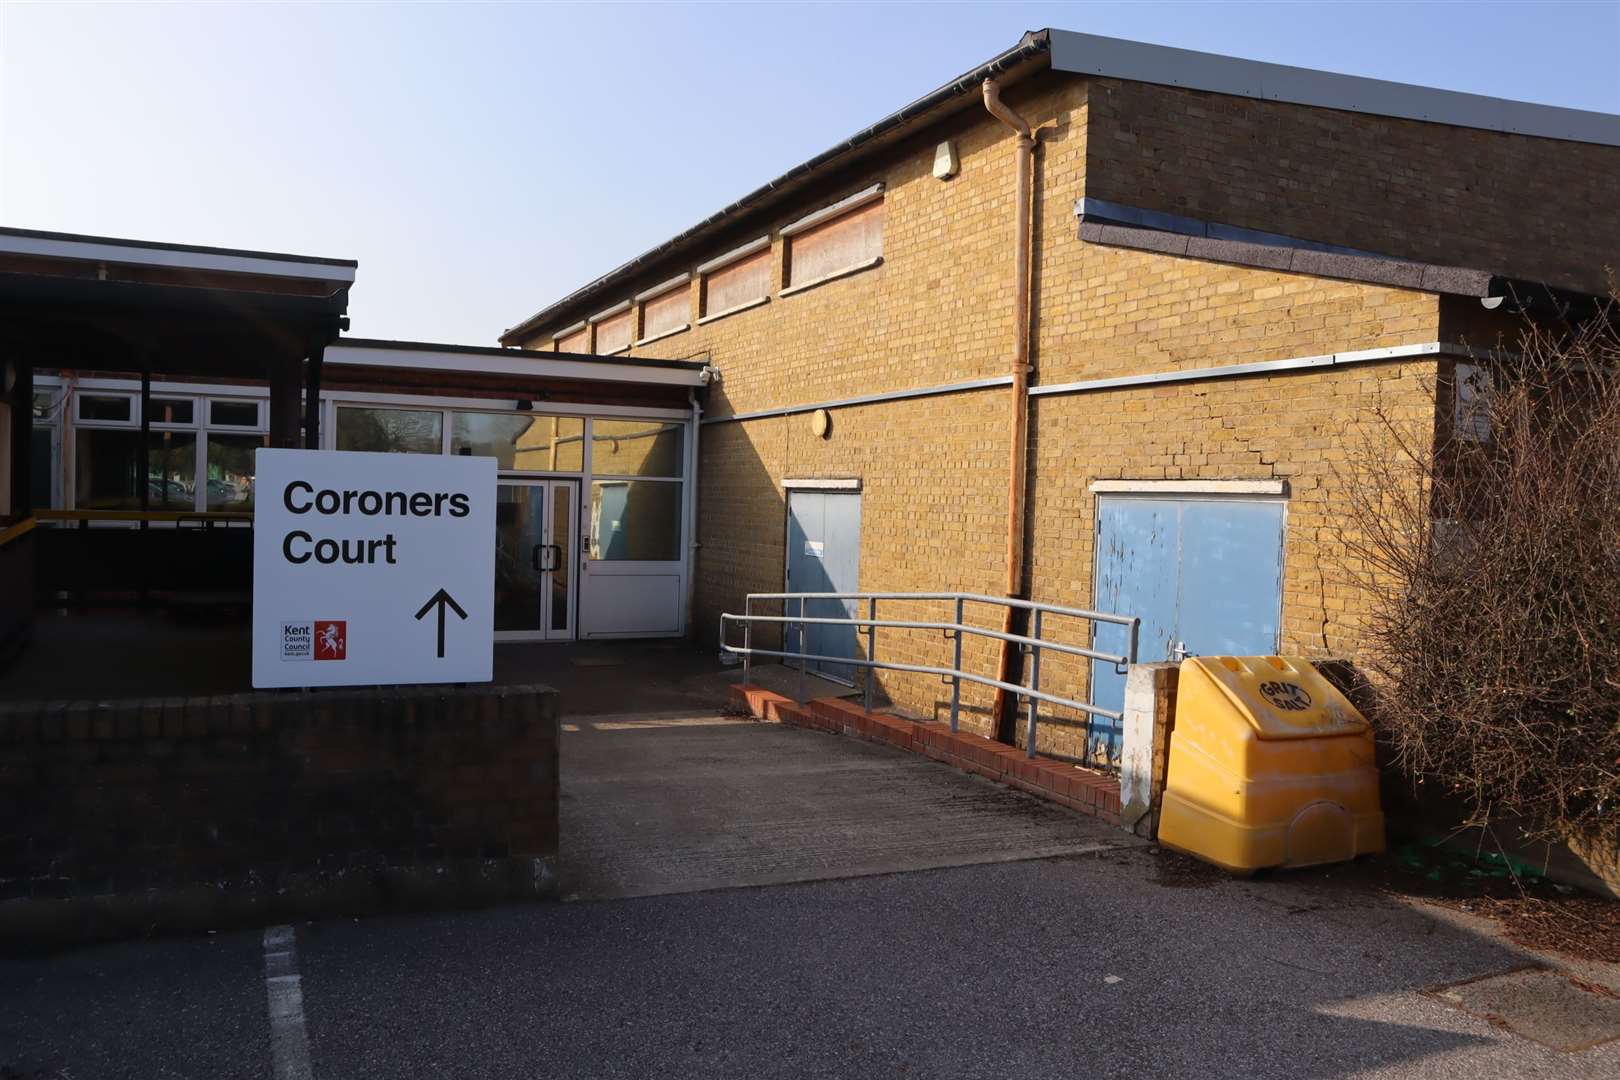 The inquest is being held at the Shepway Centre in Oxford Road, Maidstone